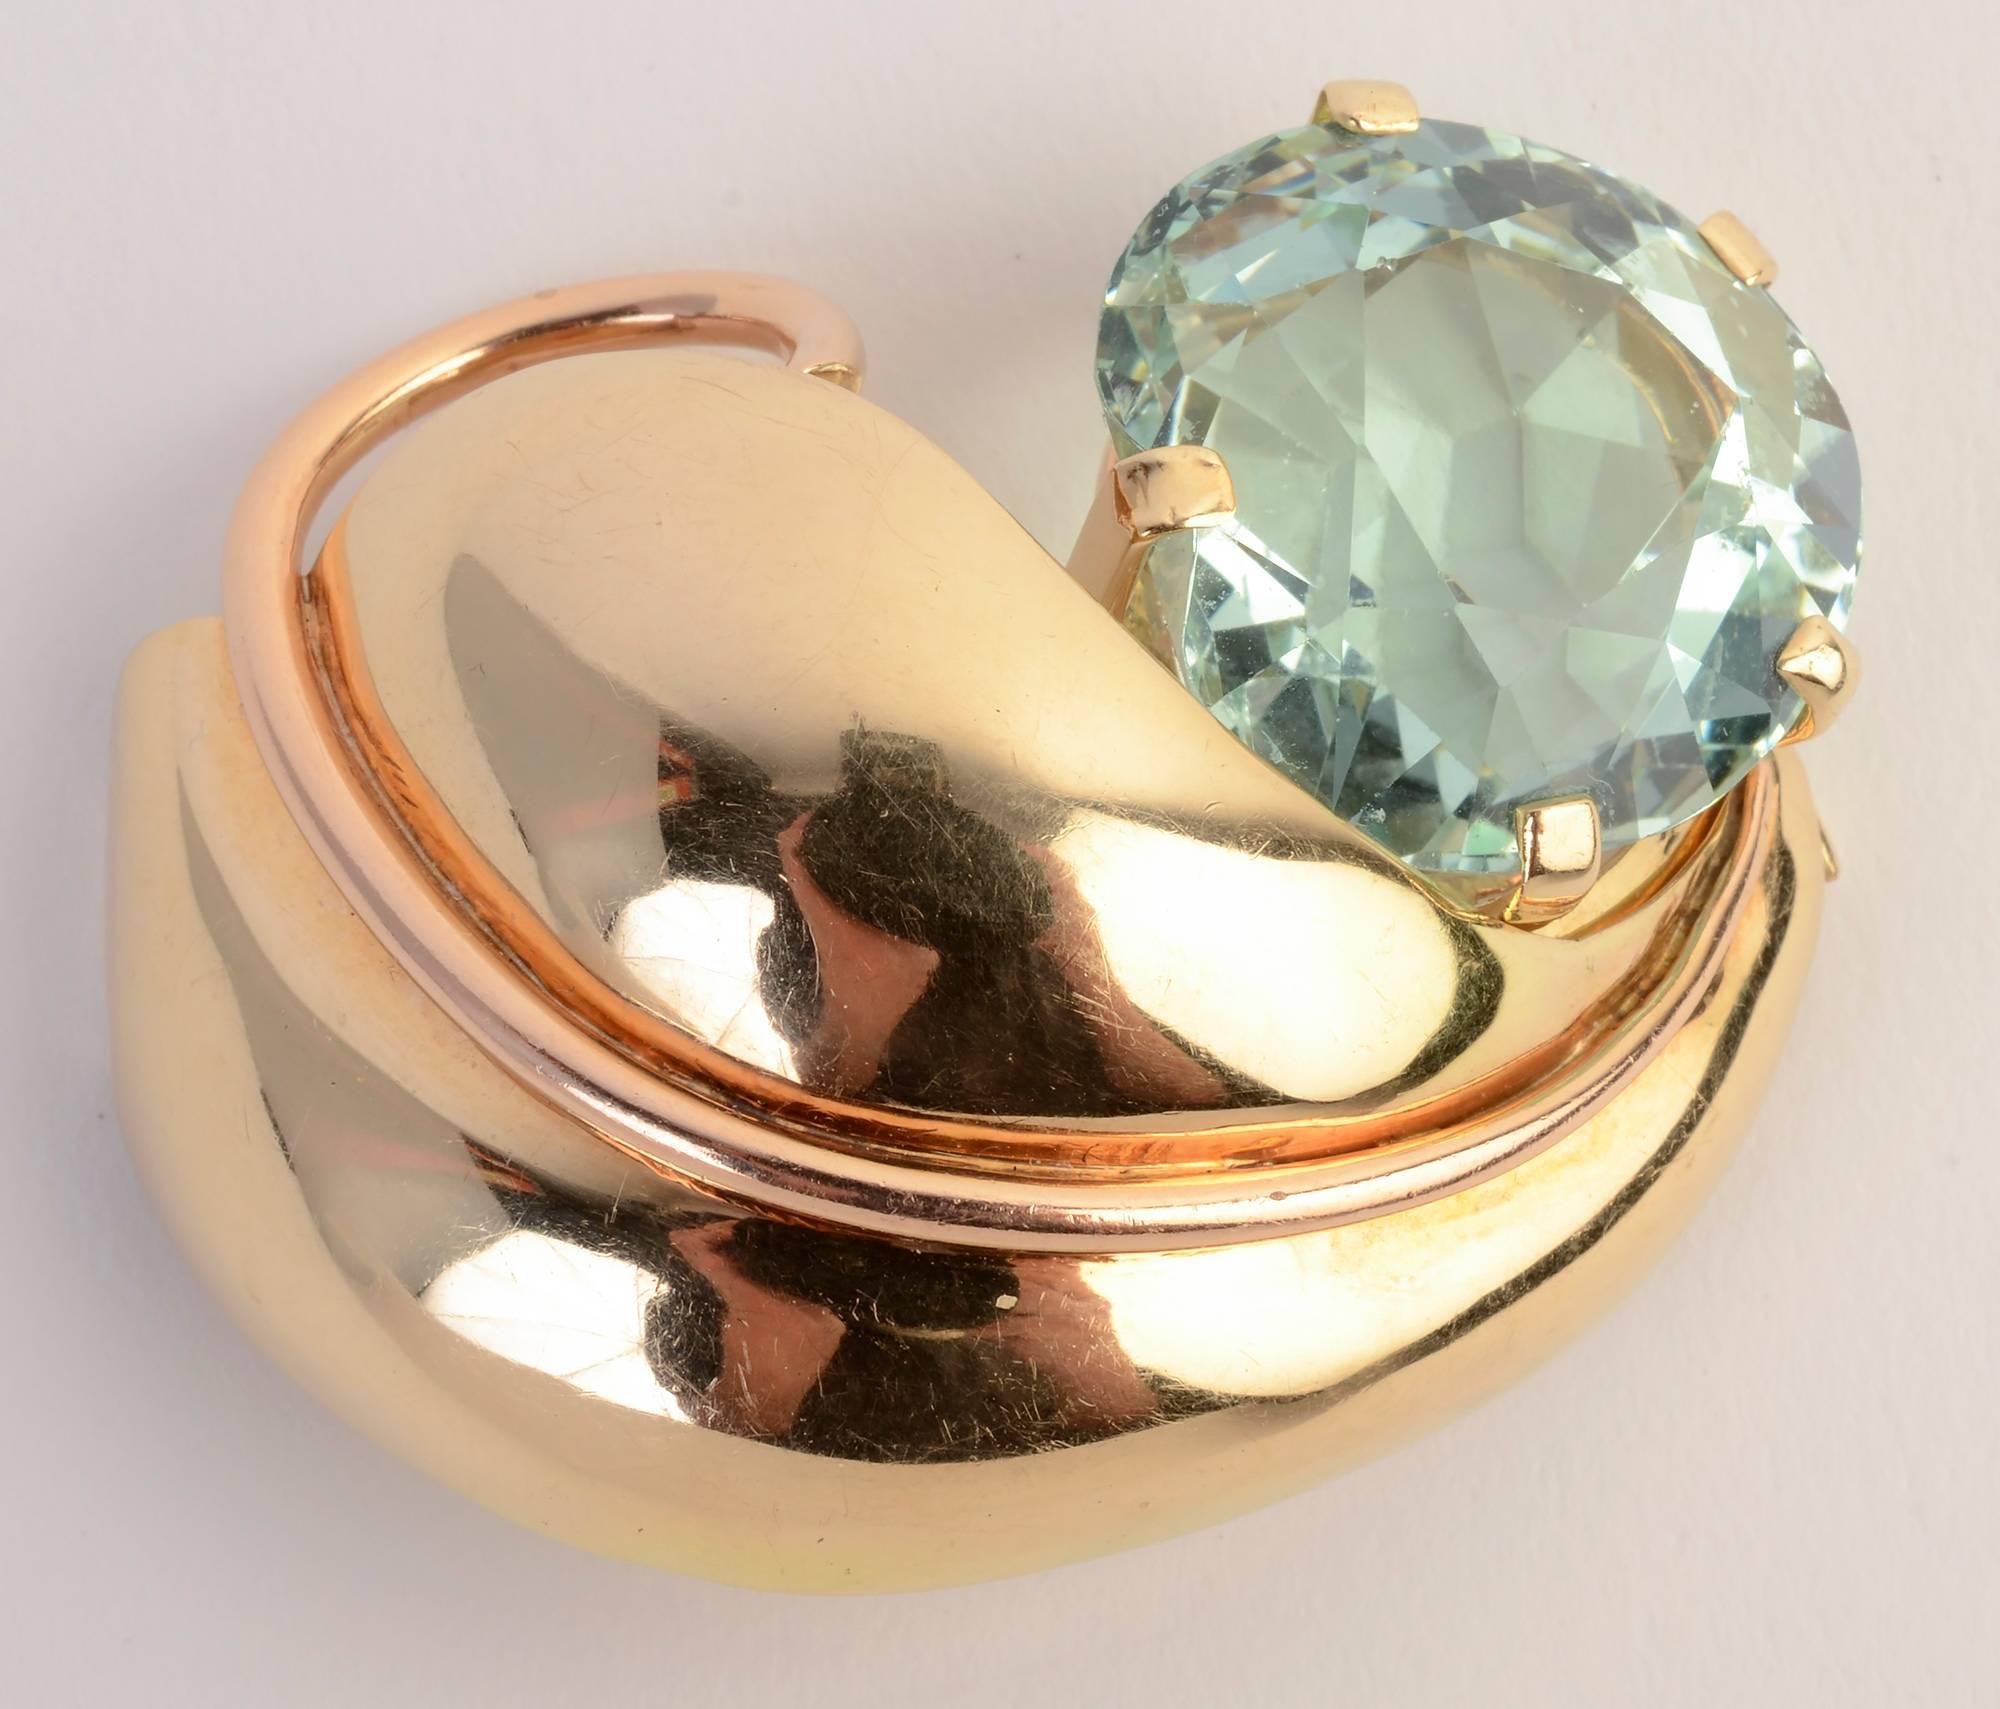 Rare Retro gold and aquamarine brooch by Seaman Schepps. It has an aquamarine stone of approximately 45 carats. The brooch is particularly versatile in that the stone can be removed so that it can be worn simply as a gold leaf.
Measurements are 2